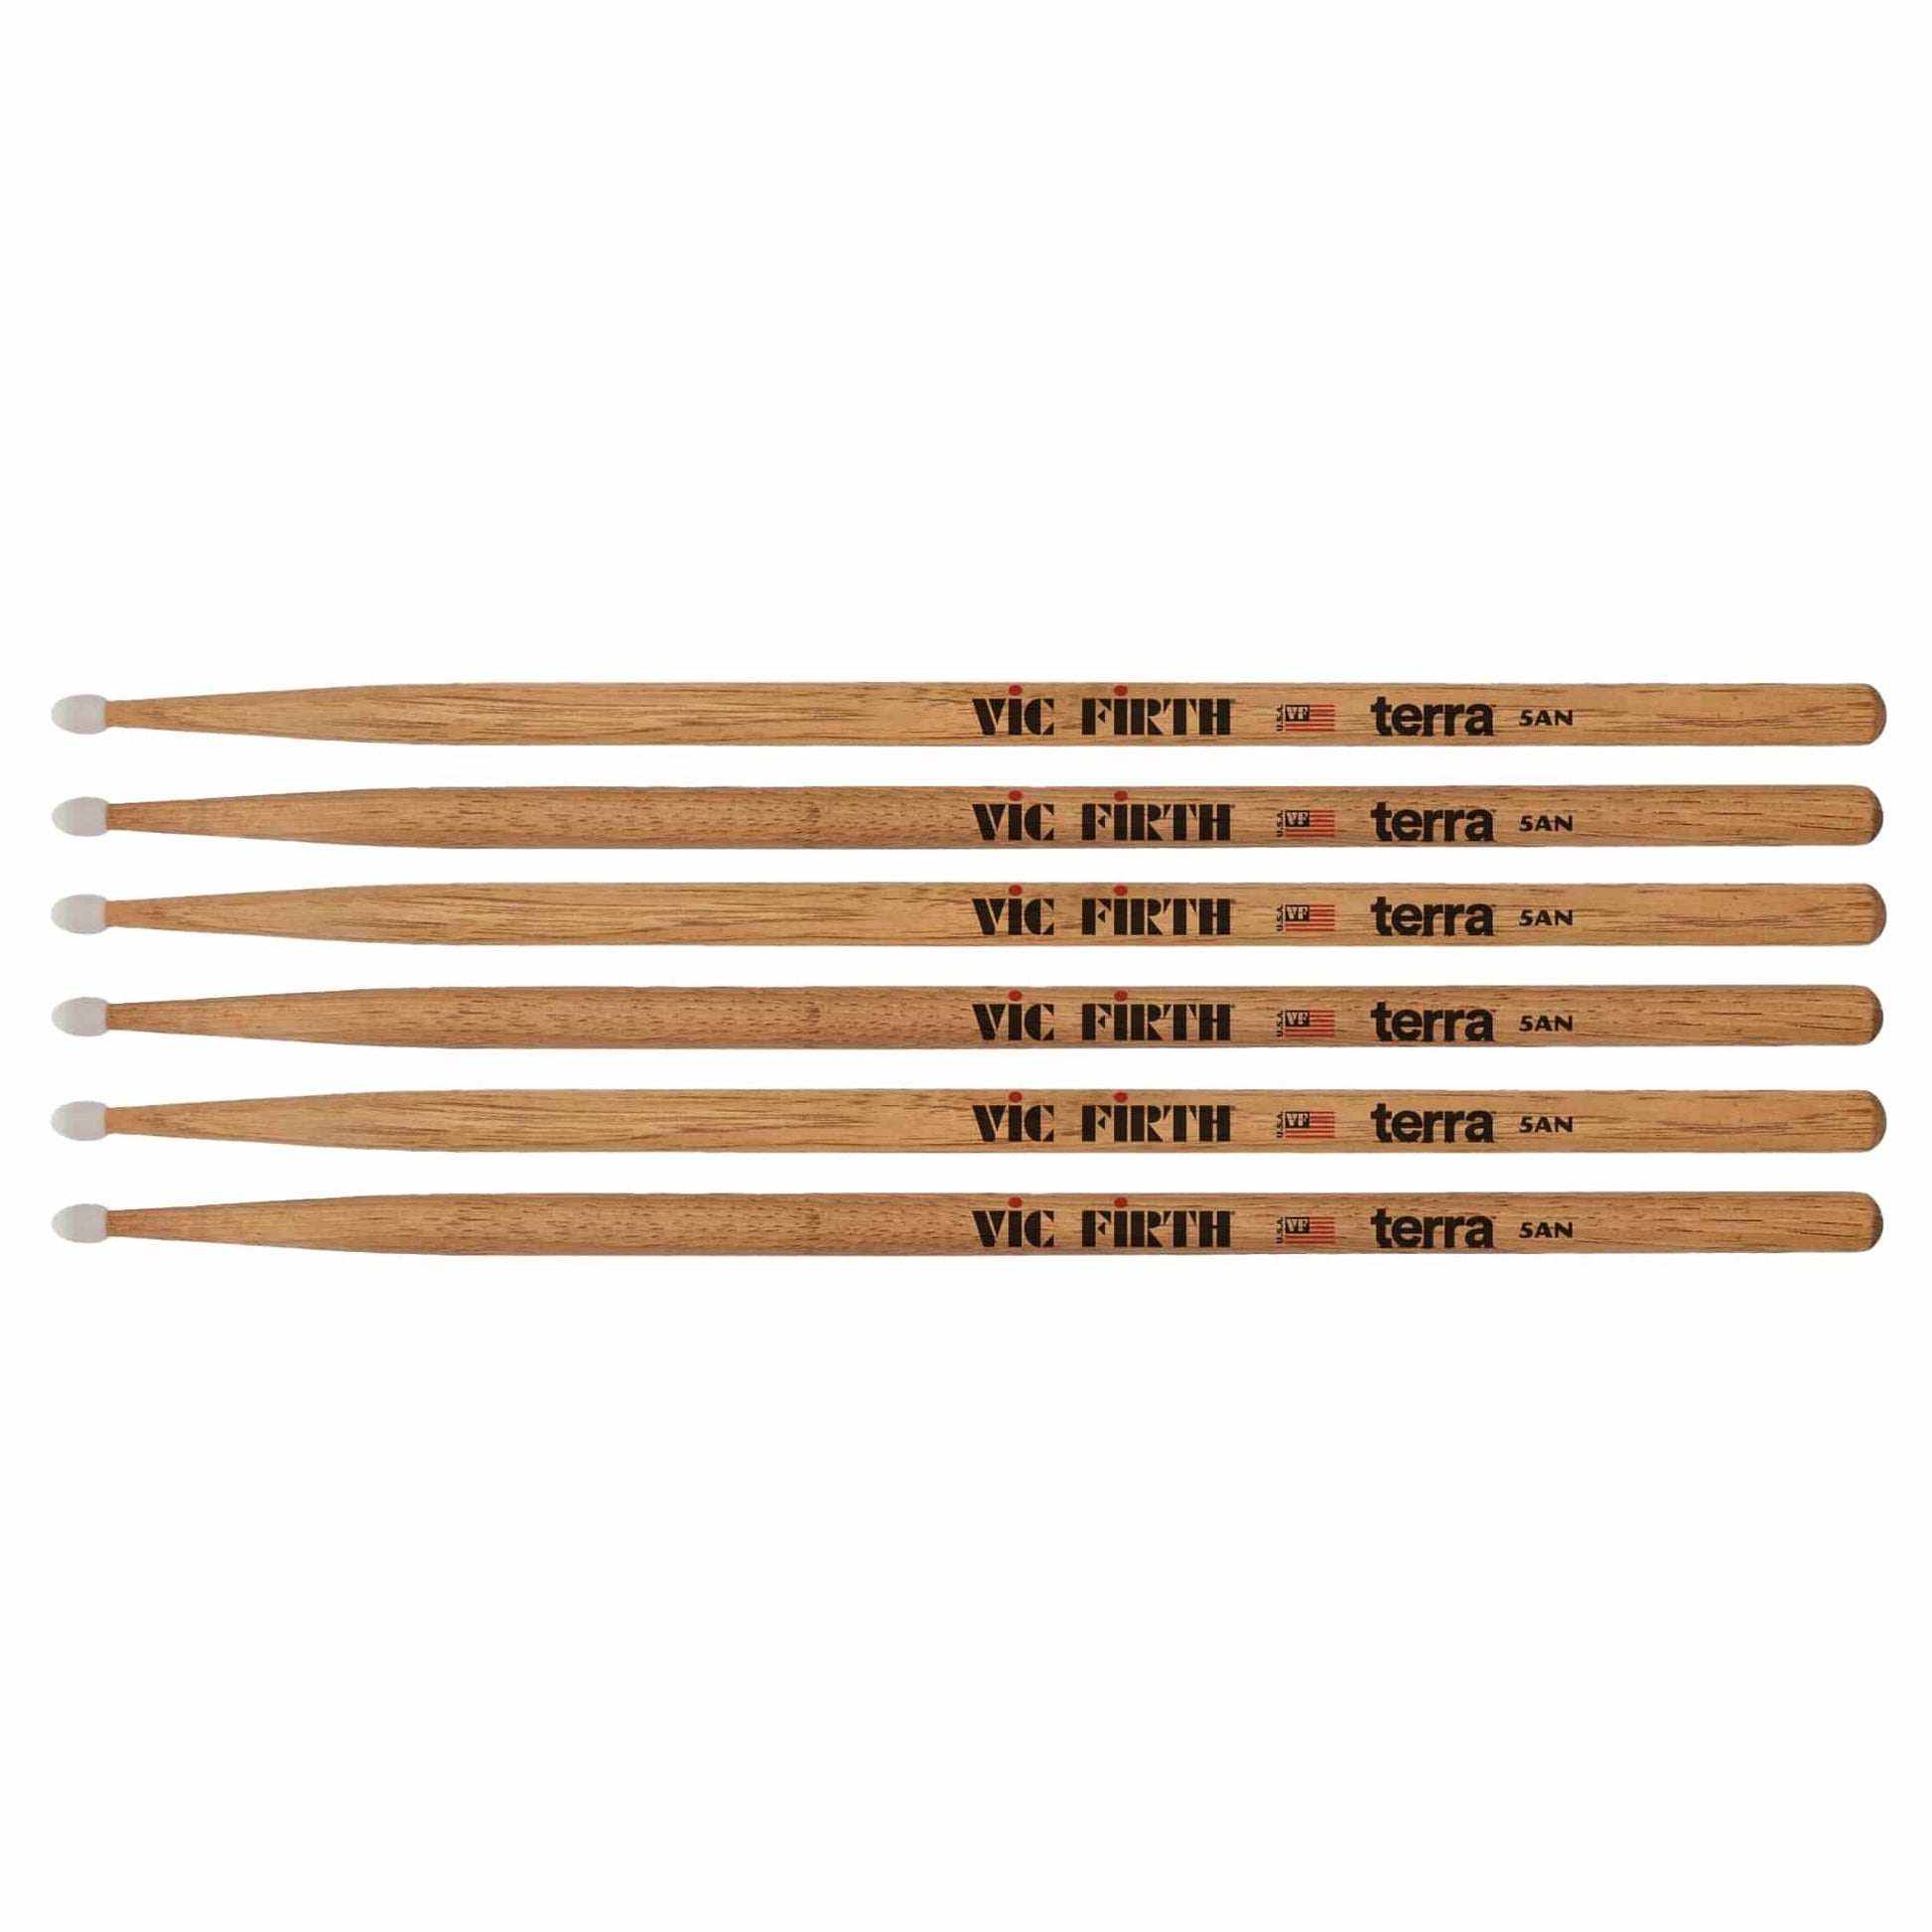 Vic Firth American Classic 5ATN Terra Nylon Tip Drum Sticks 3-Pack Bundle Drums and Percussion / Parts and Accessories / Drum Sticks and Mallets